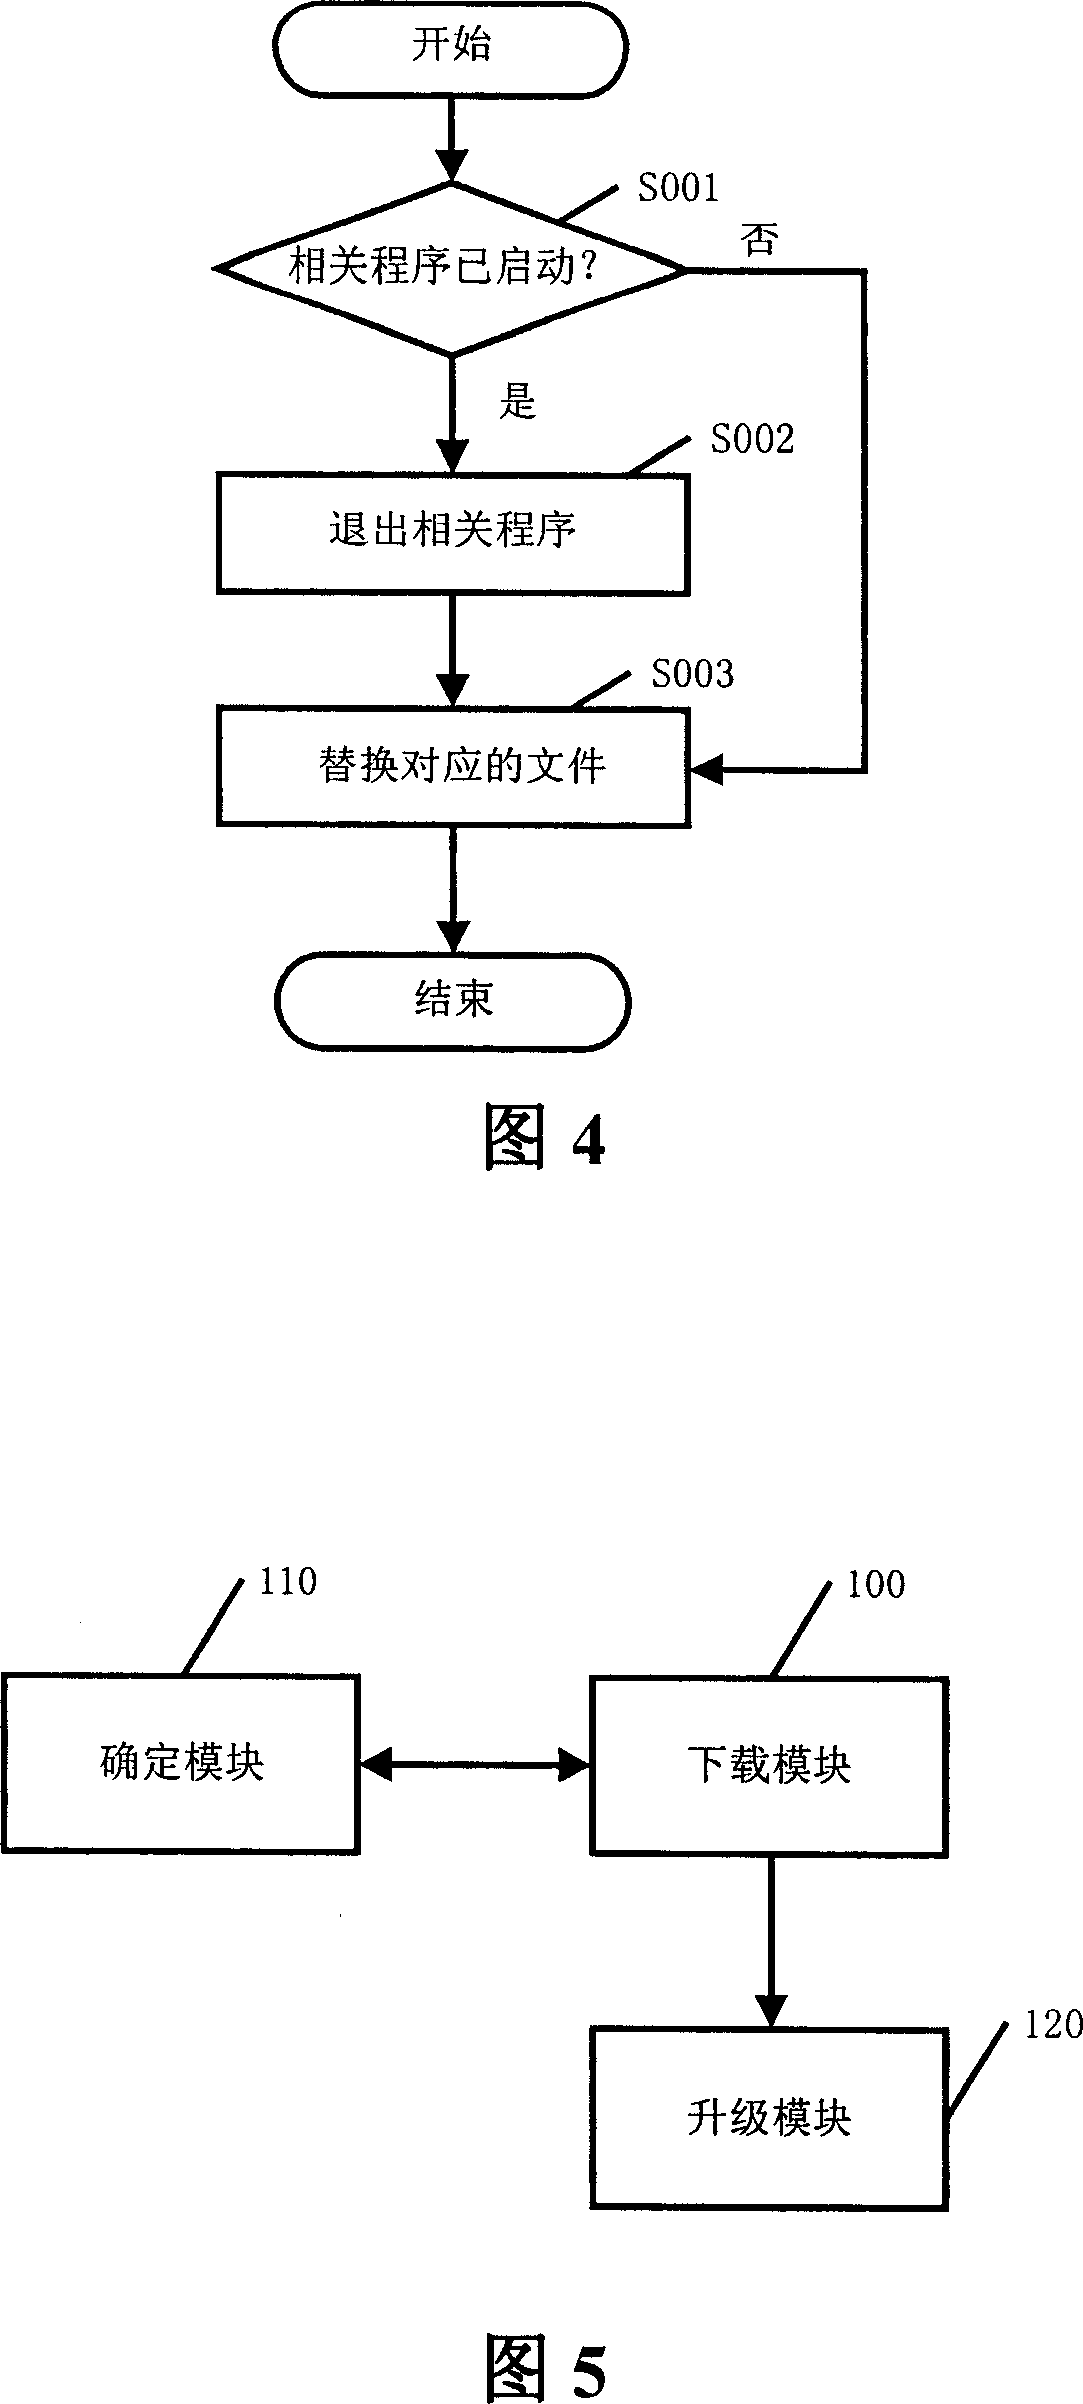 Method and apparatus used for upgrading software